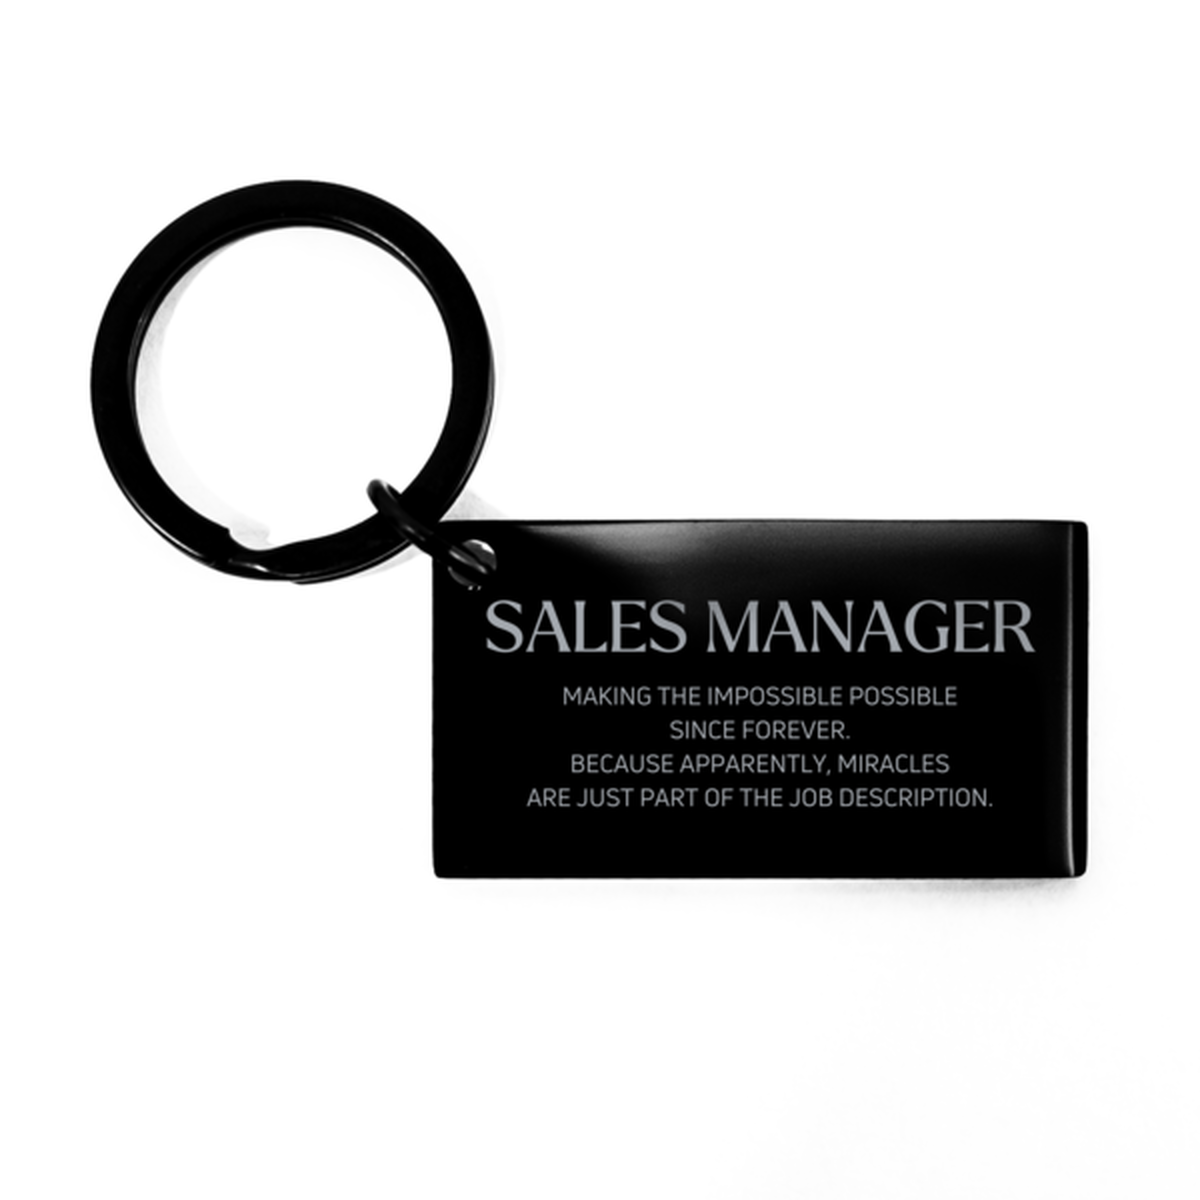 Funny Sales Manager Gifts, Miracles are just part of the job description, Inspirational Birthday Keychain For Sales Manager, Men, Women, Coworkers, Friends, Boss